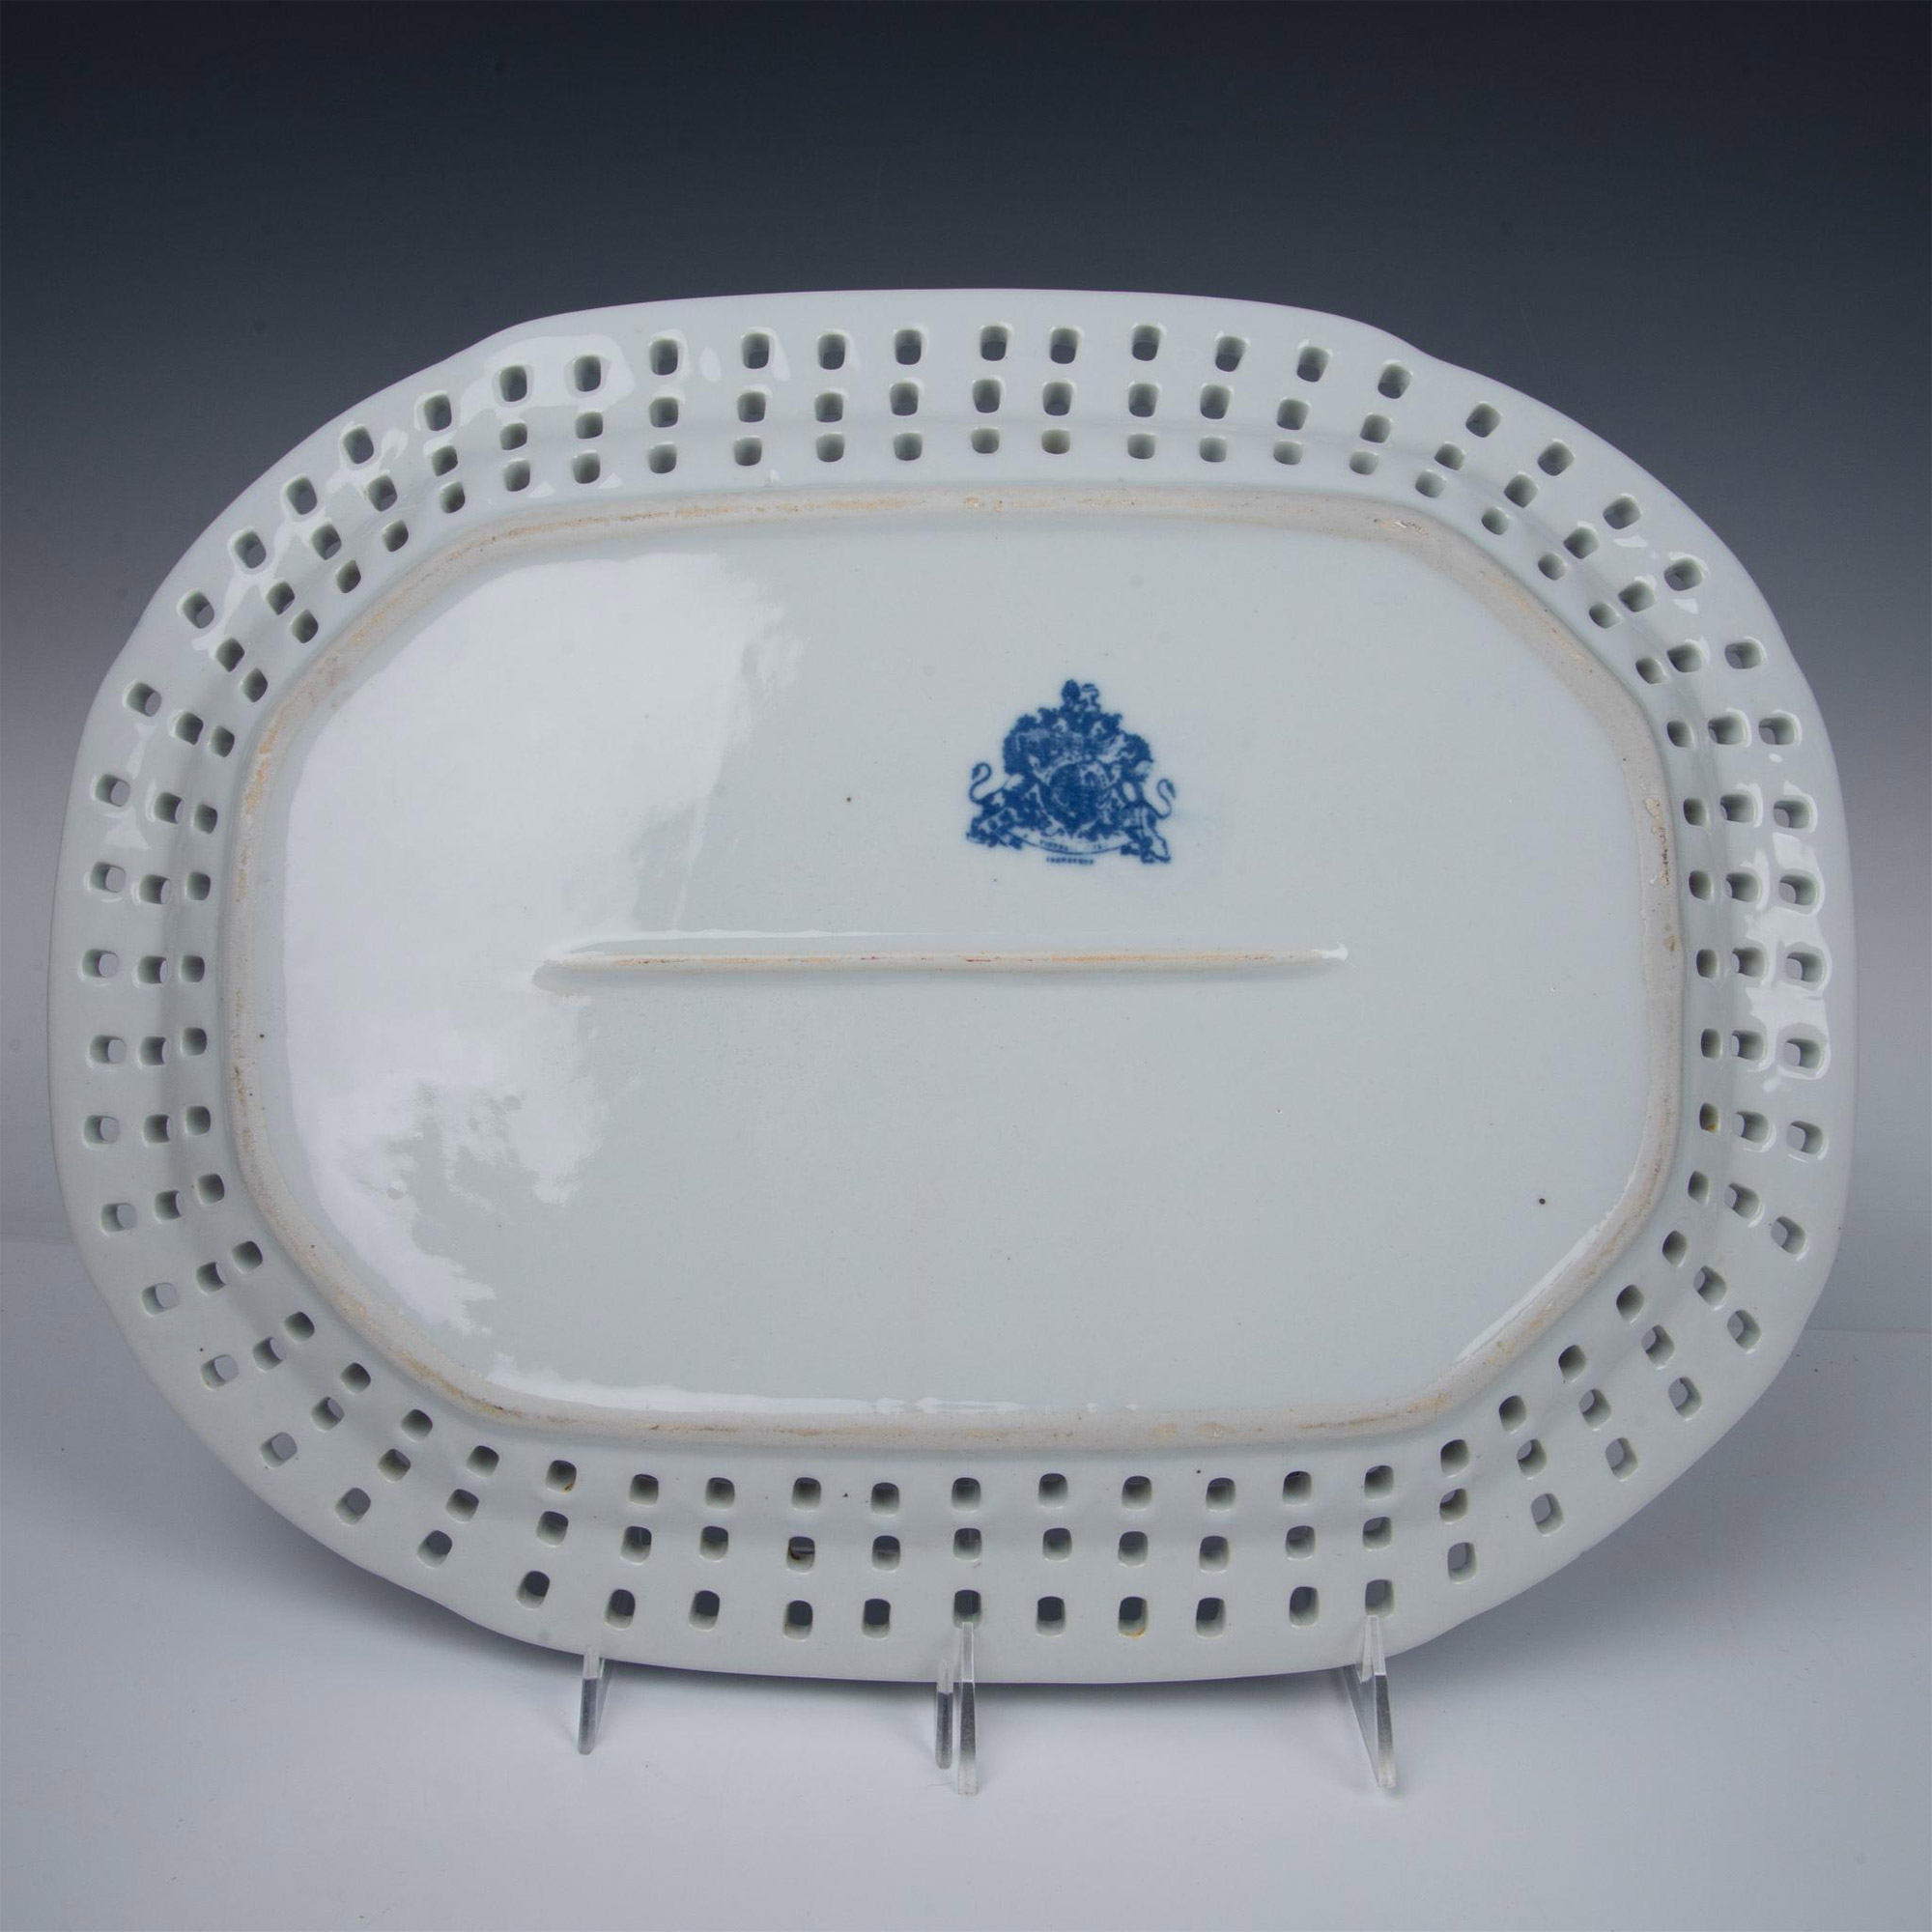 Victoria Ware Ironstone Blue and White Platter - Image 4 of 4